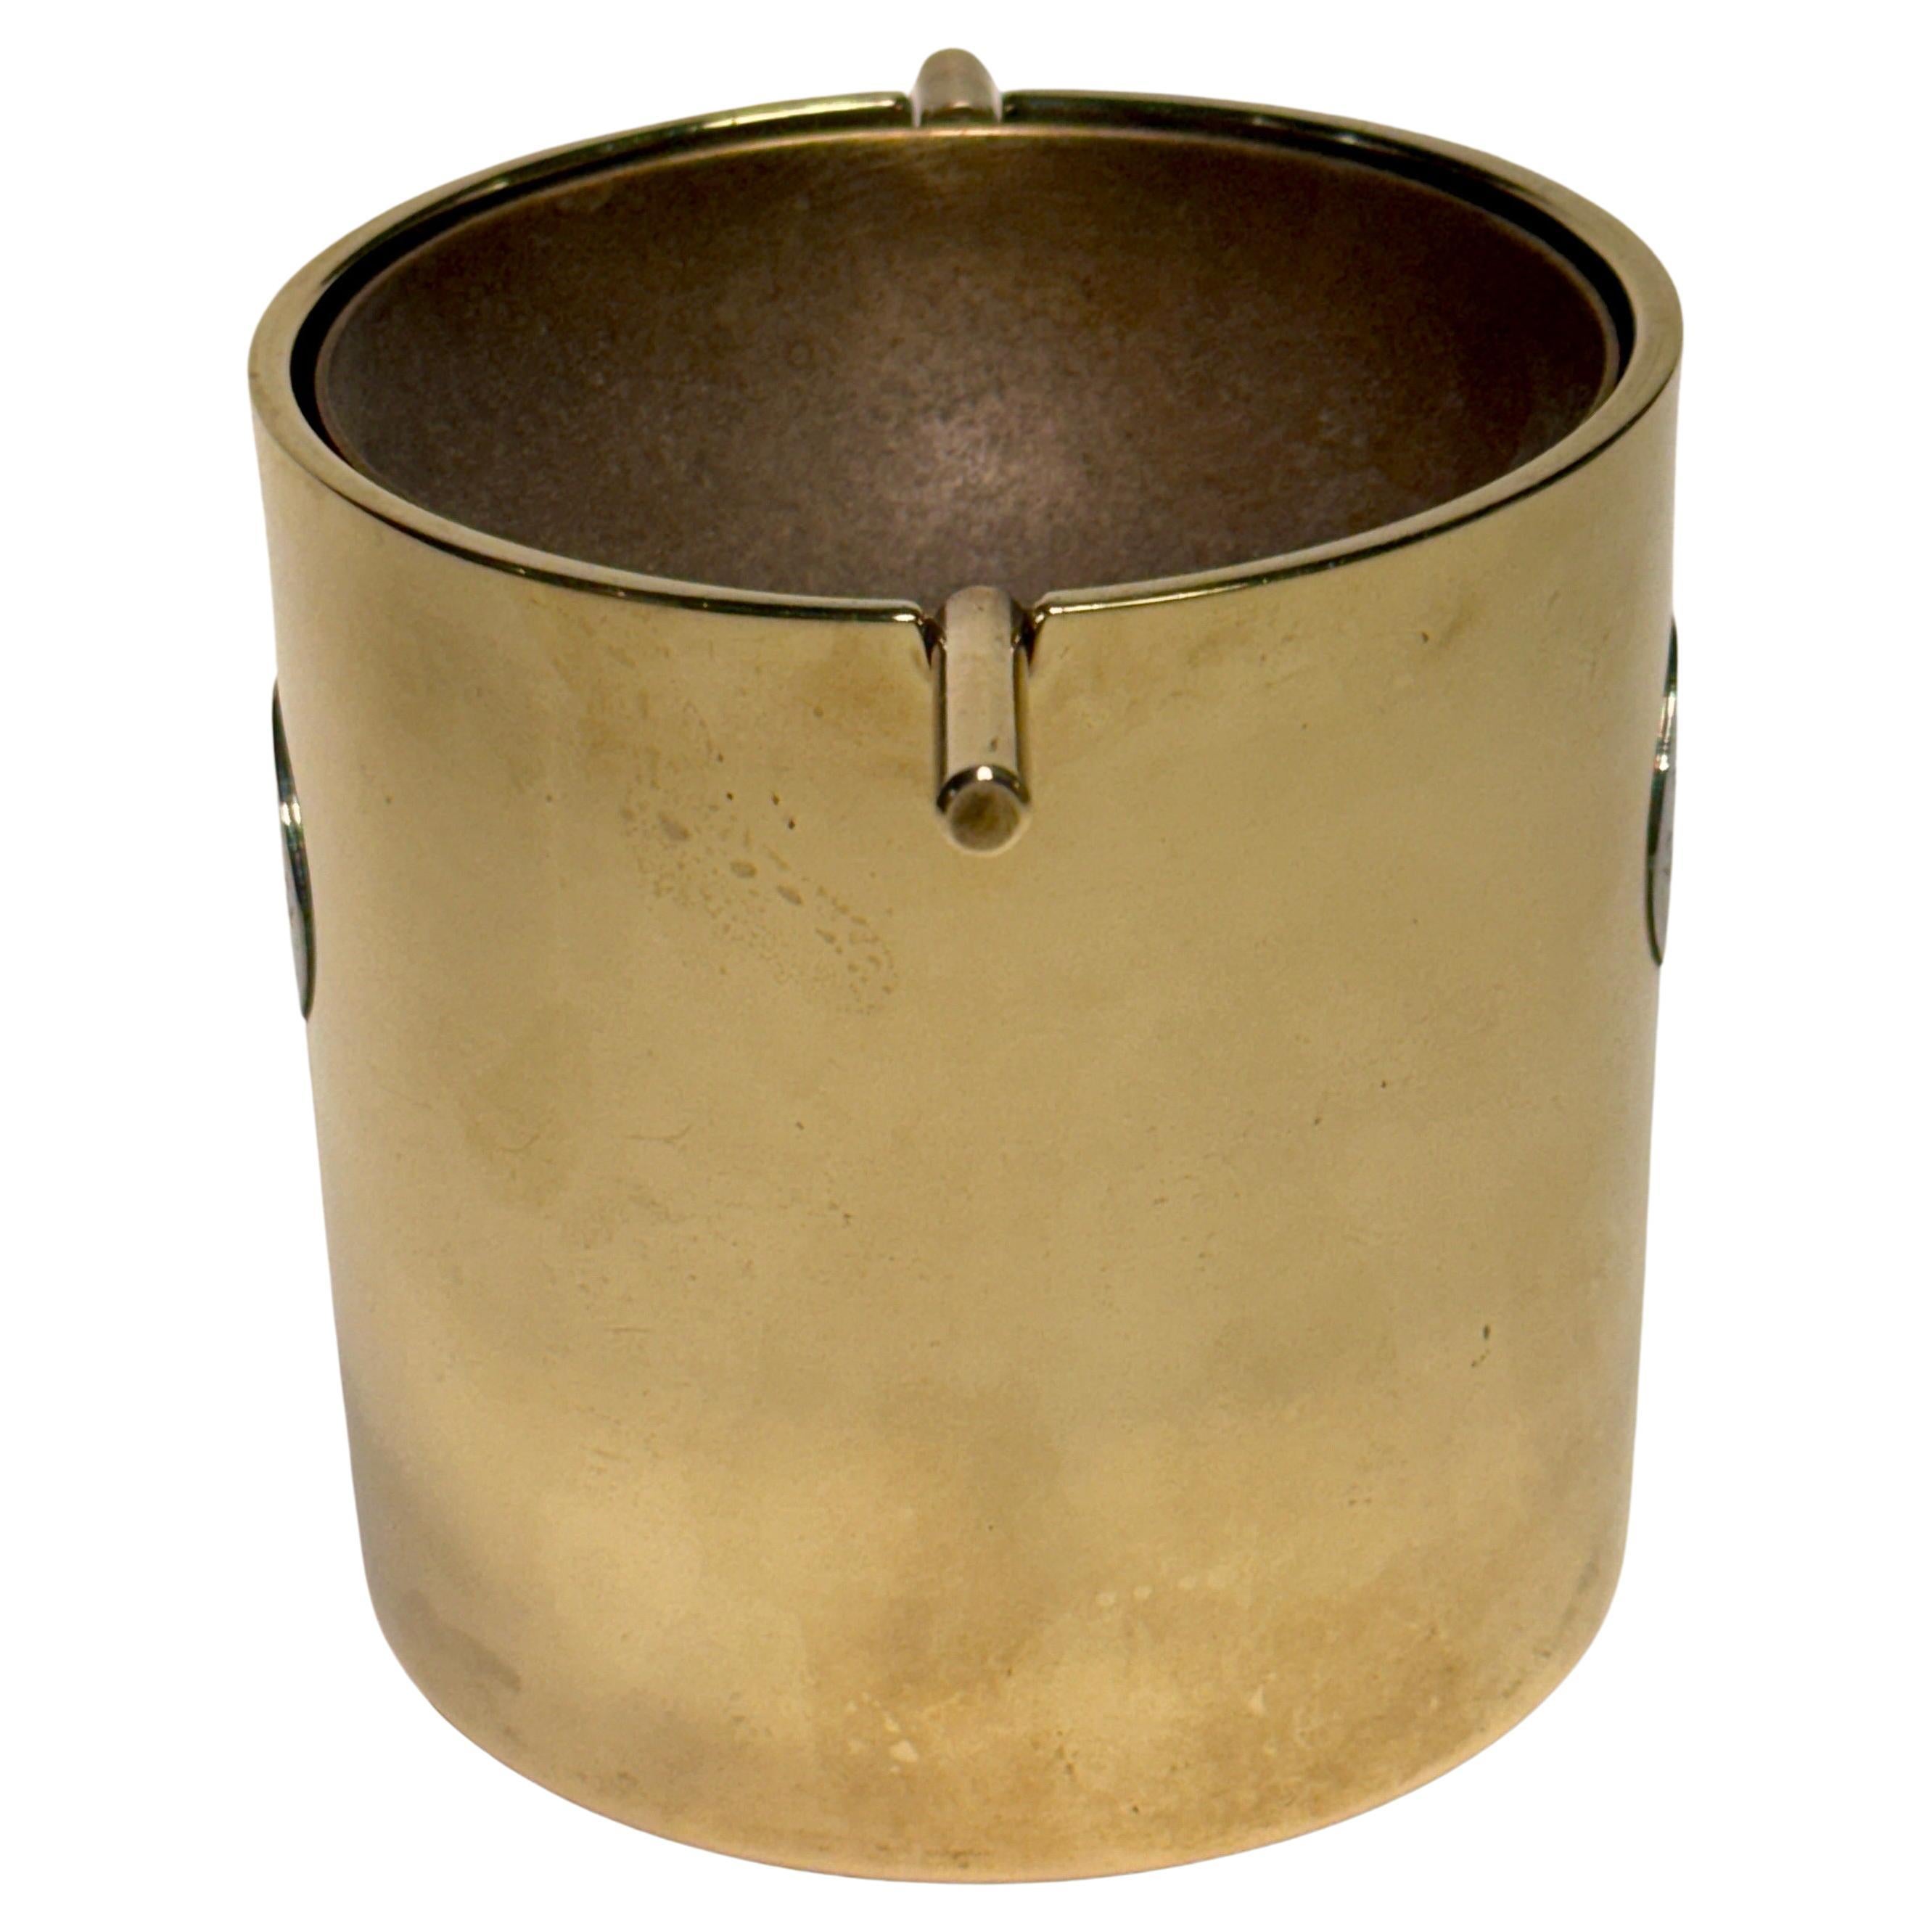 Danish Tall Thick Solid Brass Ashtray by Arne Jacobsen For Stelton, Denmark 1960's For Sale